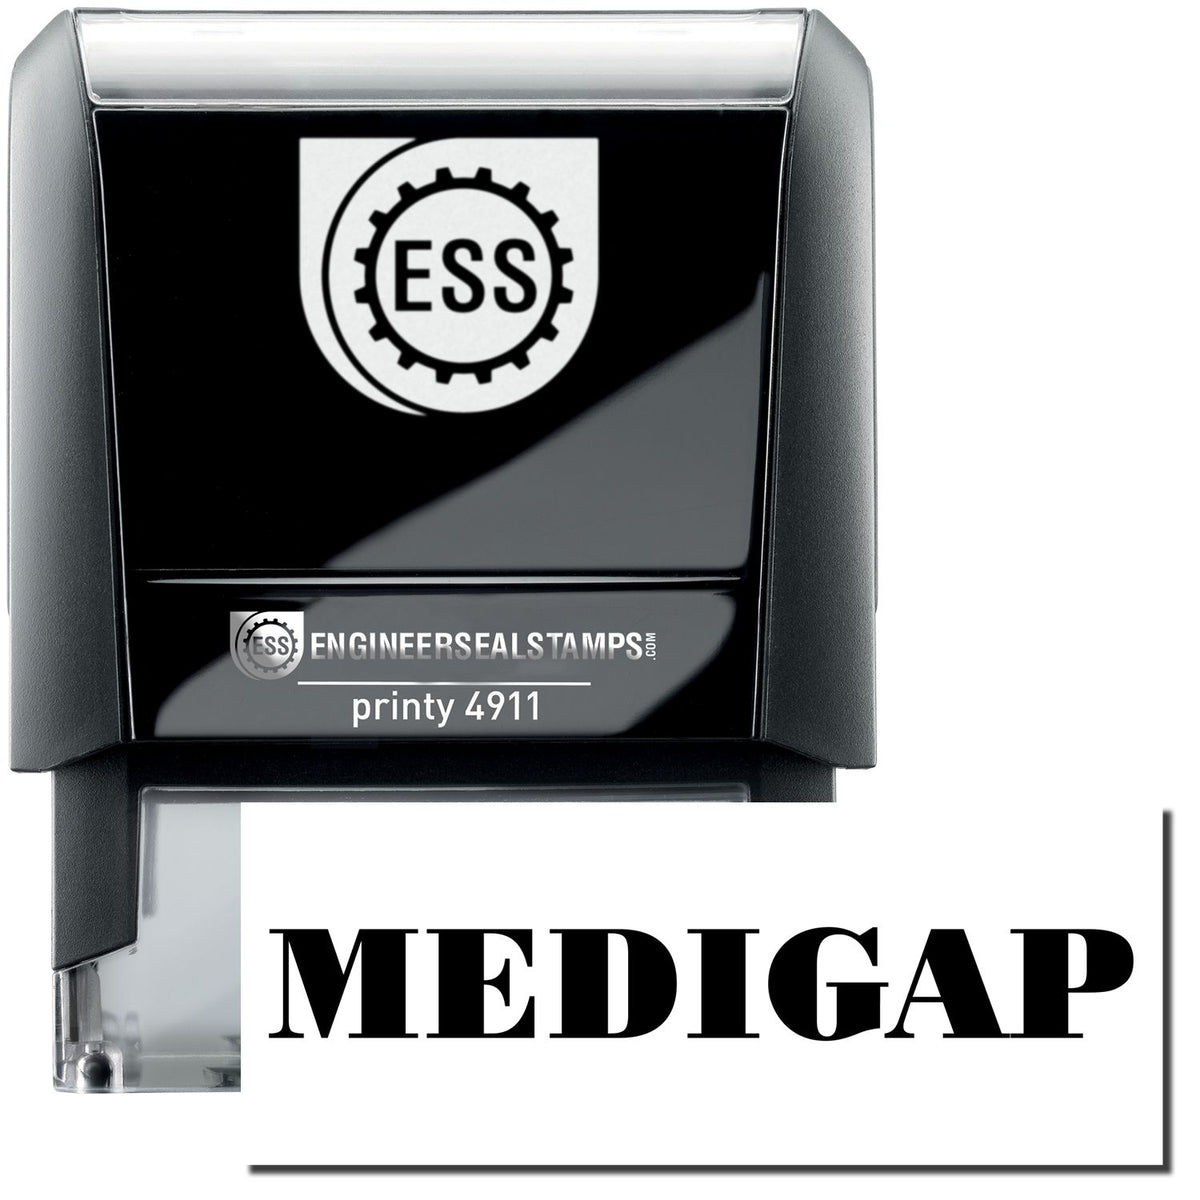 A self-inking stamp with a stamped image showing how the text &quot;MEDIGAP&quot; is displayed after stamping.